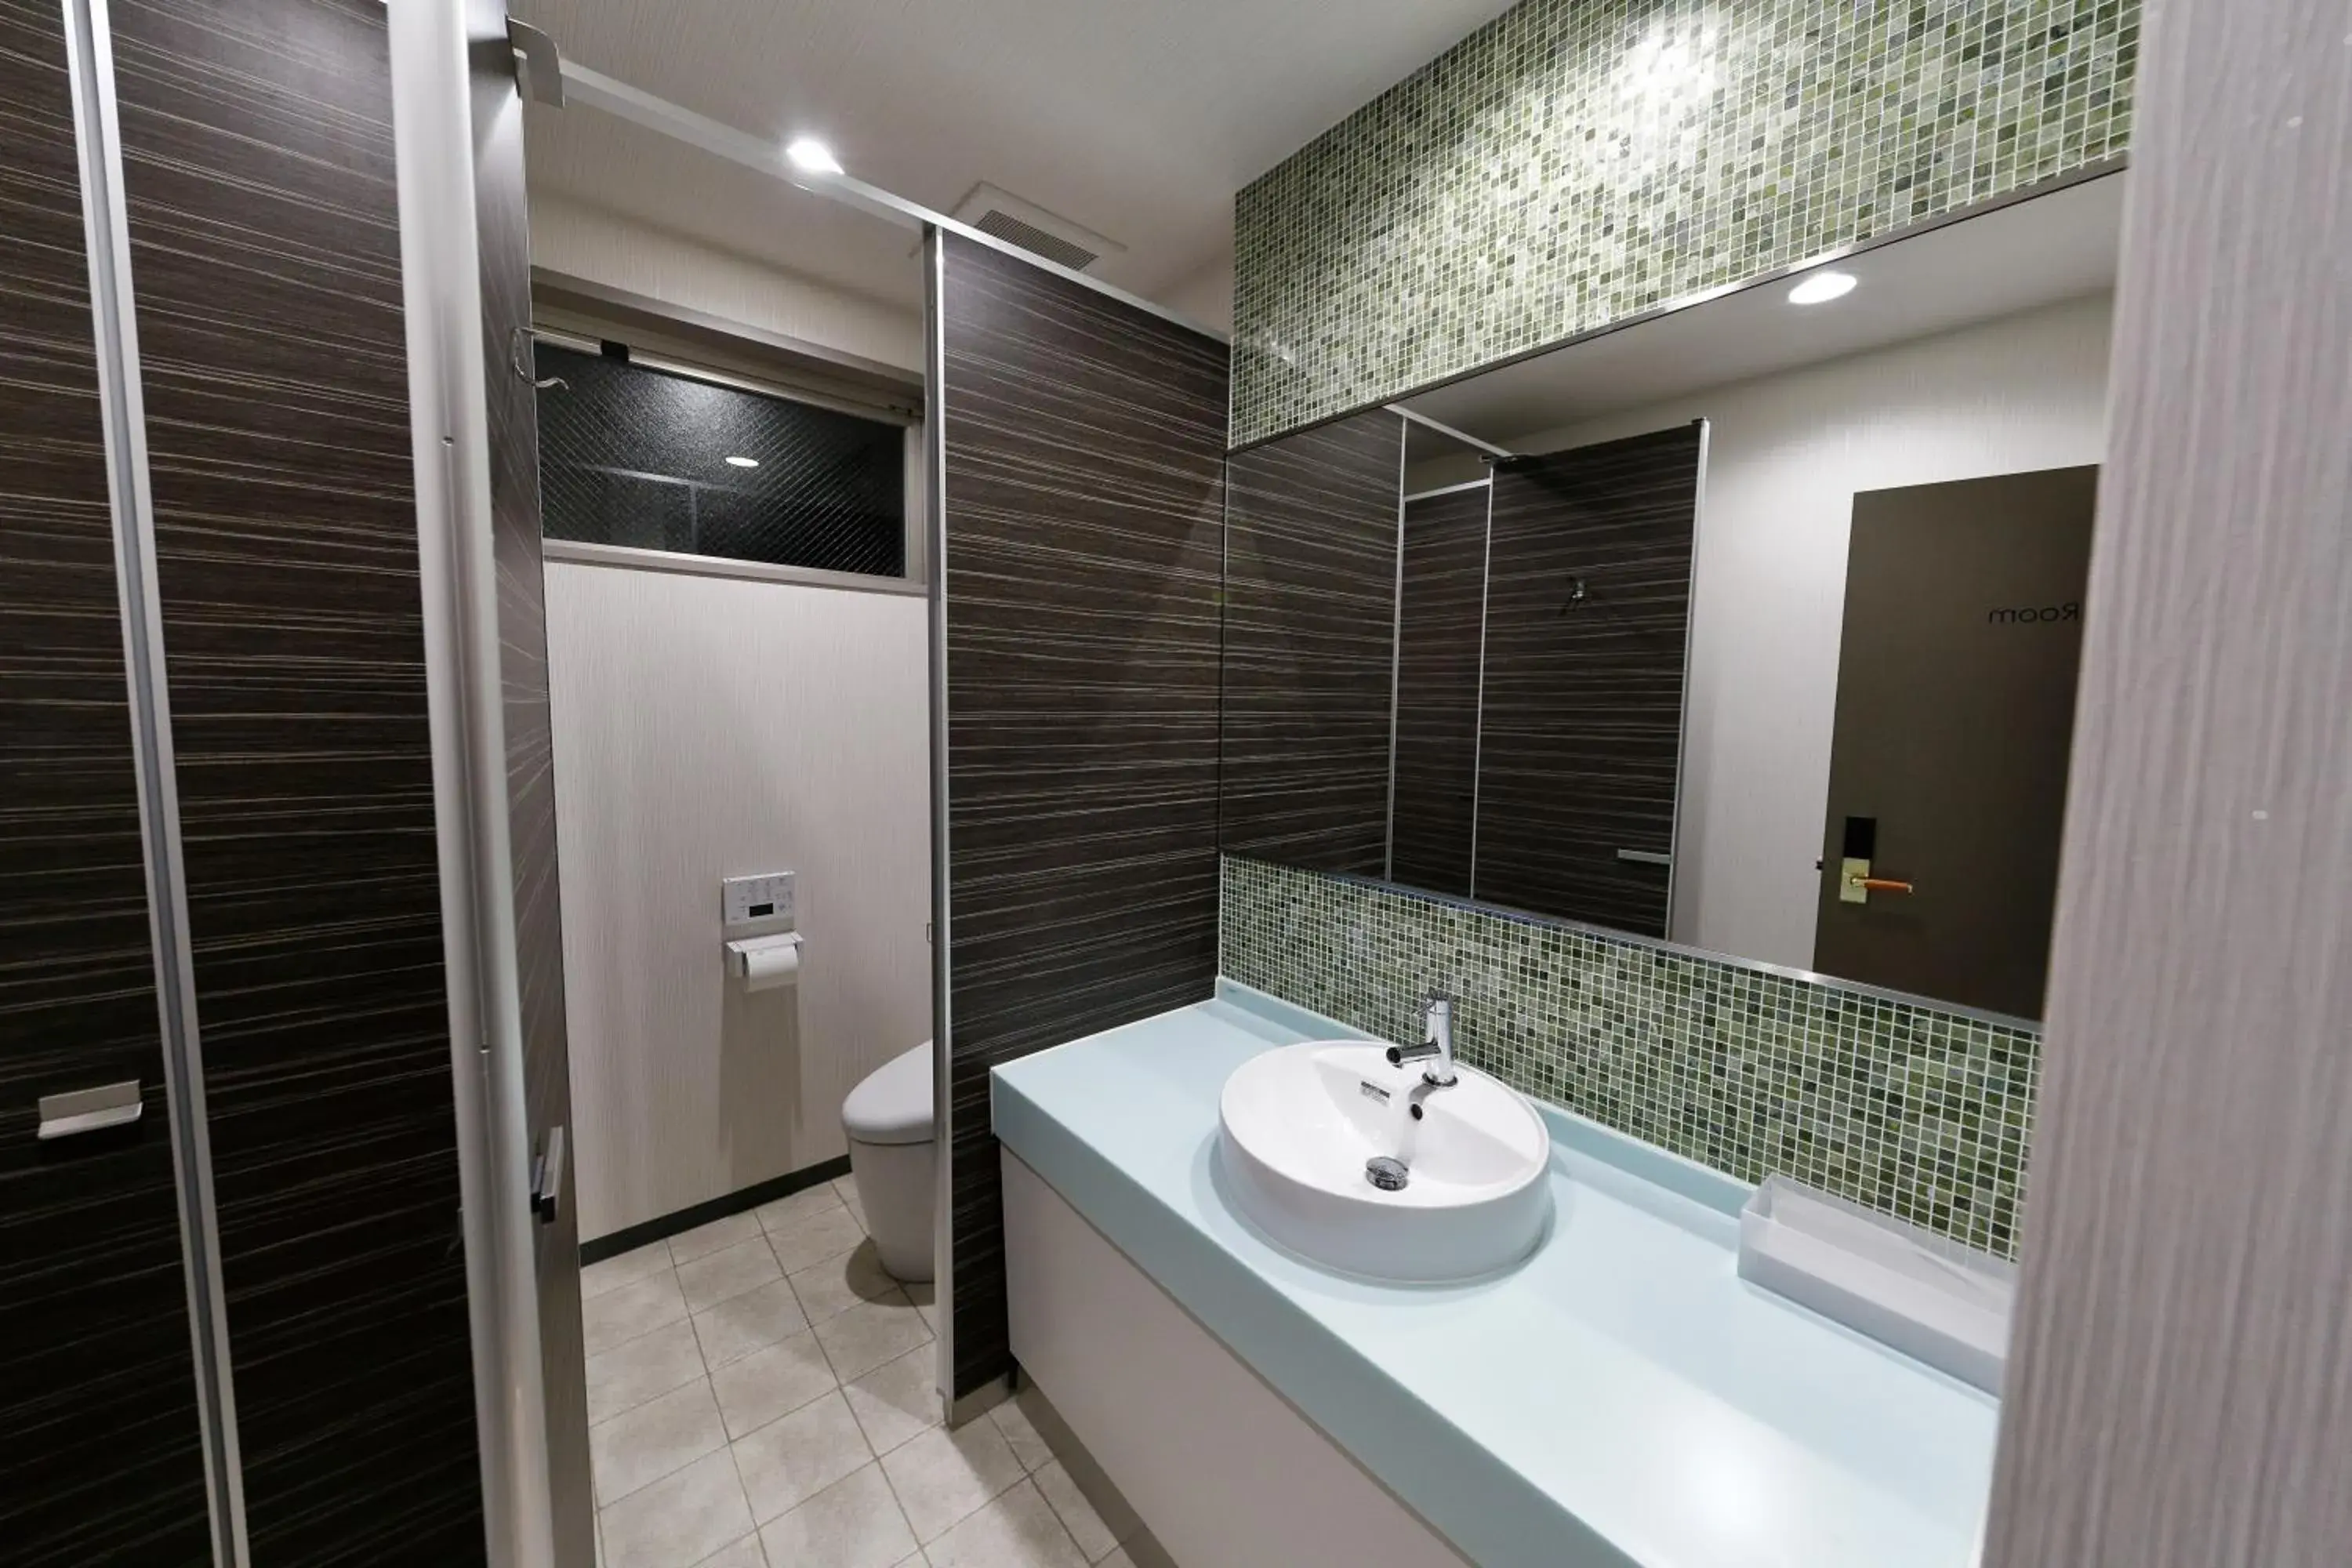 Area and facilities, Bathroom in Act Hotel Roppongi